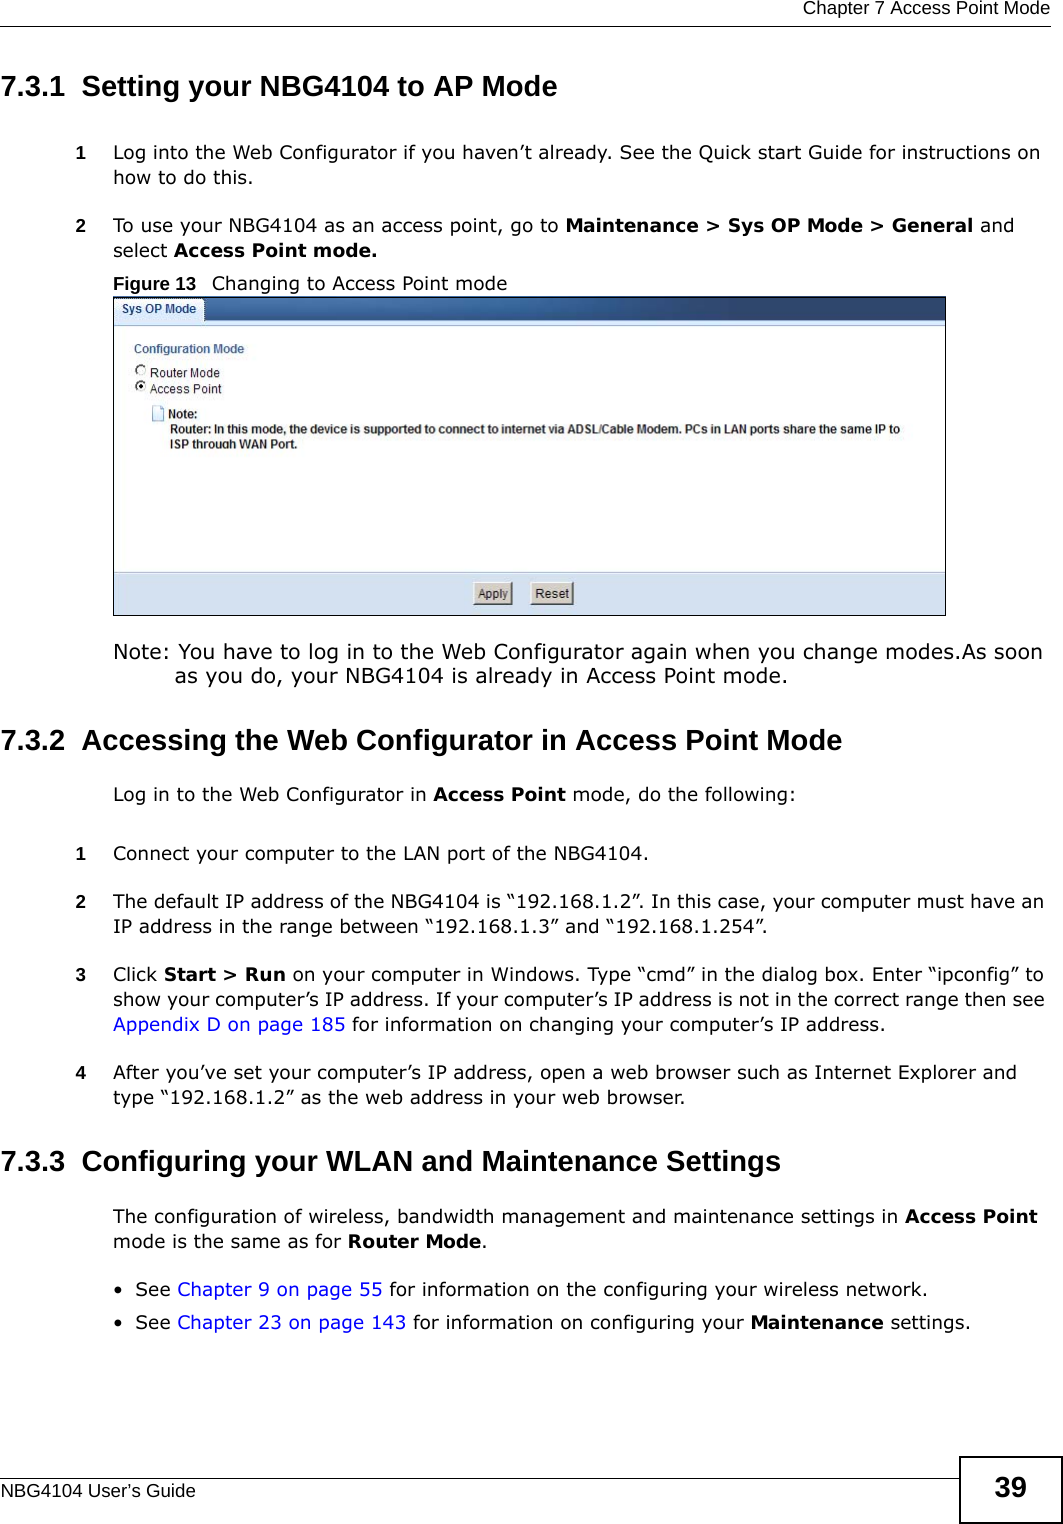  Chapter 7 Access Point ModeNBG4104 User’s Guide 397.3.1  Setting your NBG4104 to AP Mode1Log into the Web Configurator if you haven’t already. See the Quick start Guide for instructions on how to do this.2To use your NBG4104 as an access point, go to Maintenance &gt; Sys OP Mode &gt; General and select Access Point mode. Figure 13   Changing to Access Point modeNote: You have to log in to the Web Configurator again when you change modes.As soon as you do, your NBG4104 is already in Access Point mode.7.3.2  Accessing the Web Configurator in Access Point ModeLog in to the Web Configurator in Access Point mode, do the following:1Connect your computer to the LAN port of the NBG4104. 2The default IP address of the NBG4104 is “192.168.1.2”. In this case, your computer must have an IP address in the range between “192.168.1.3” and “192.168.1.254”.3Click Start &gt; Run on your computer in Windows. Type “cmd” in the dialog box. Enter “ipconfig” to show your computer’s IP address. If your computer’s IP address is not in the correct range then see Appendix D on page 185 for information on changing your computer’s IP address.4After you’ve set your computer’s IP address, open a web browser such as Internet Explorer and type “192.168.1.2” as the web address in your web browser.7.3.3  Configuring your WLAN and Maintenance SettingsThe configuration of wireless, bandwidth management and maintenance settings in Access Point mode is the same as for Router Mode.•See Chapter 9 on page 55 for information on the configuring your wireless network.•See Chapter 23 on page 143 for information on configuring your Maintenance settings. 